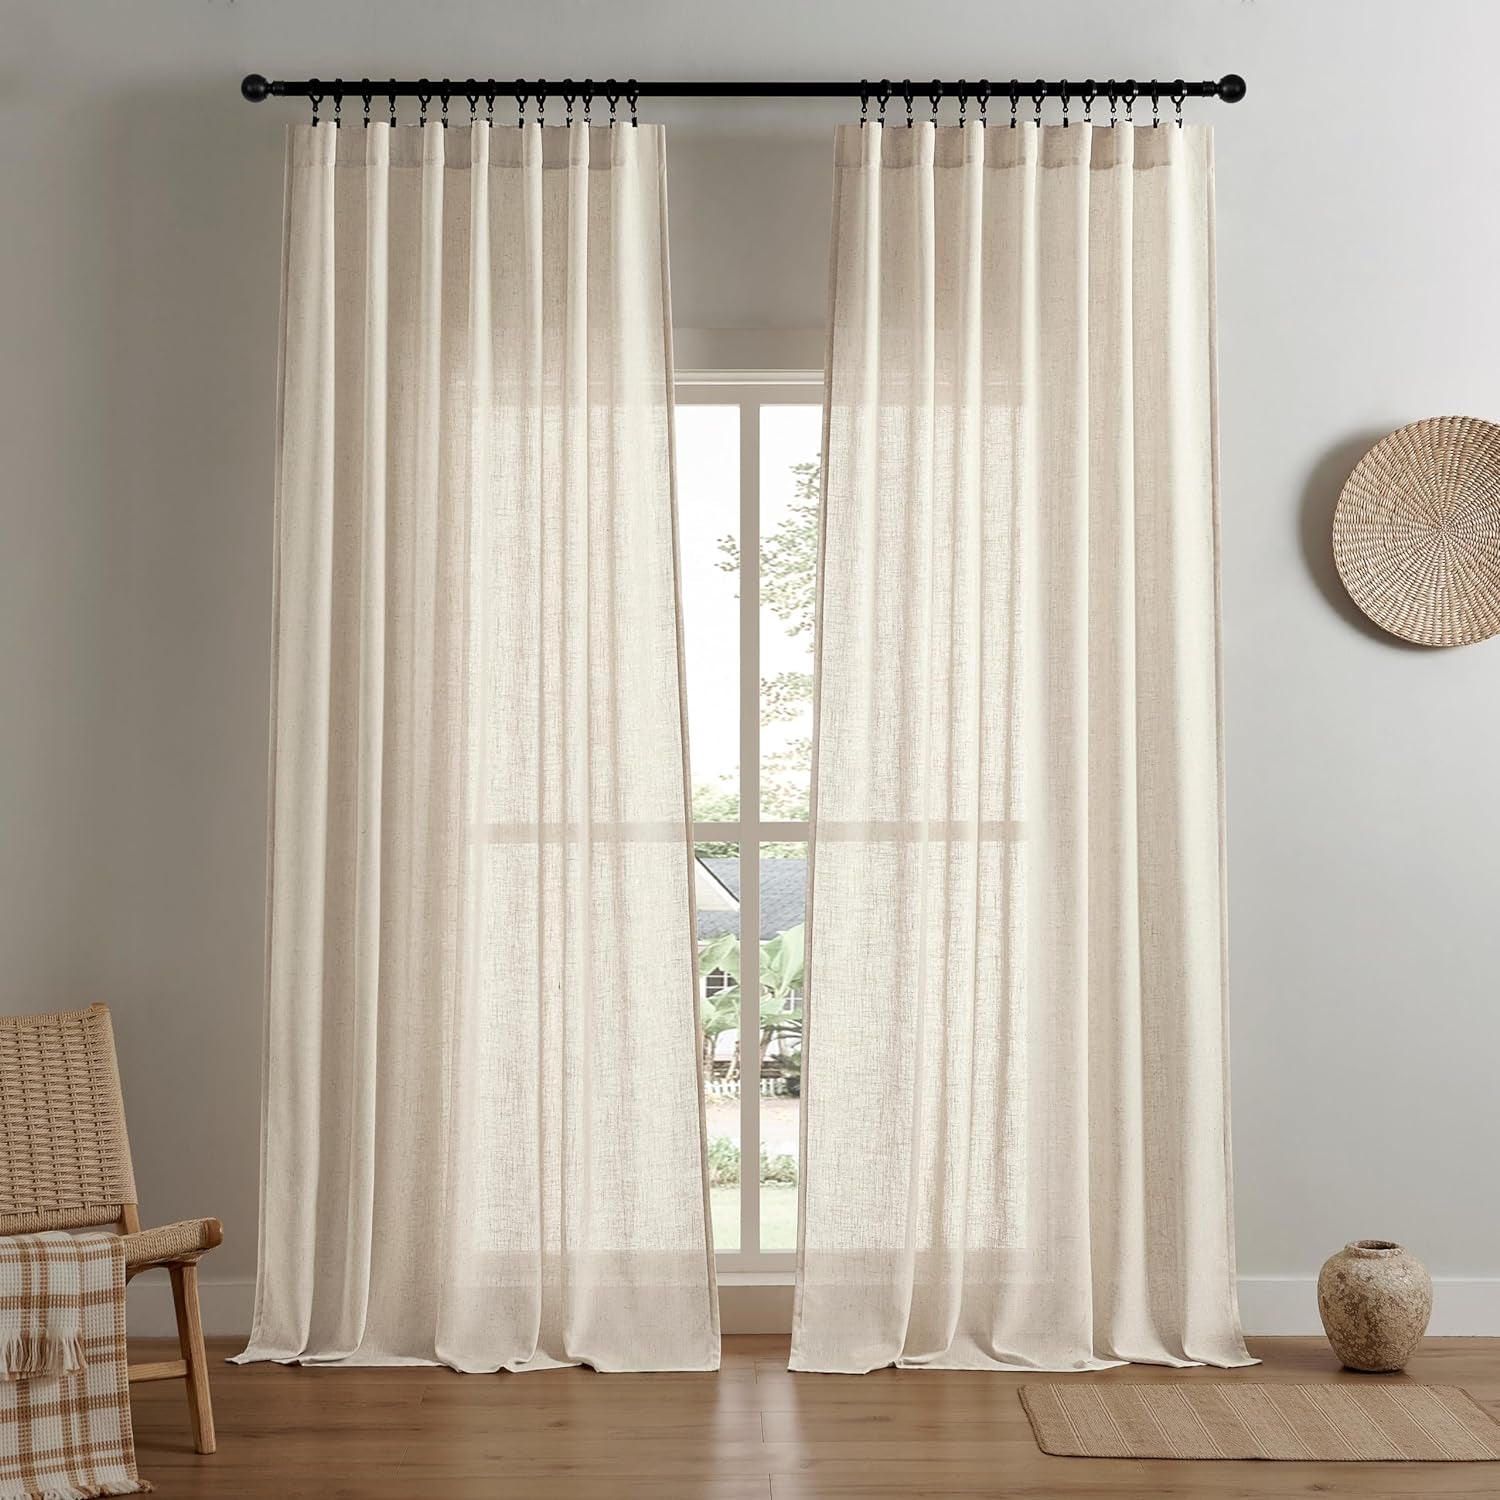 Joydeco Linen Curtains for Living Room,Semi-Sheer Curtains 108 Inches Long,Living Room Curtains 2 Panel Sets,White Curtains Pinch Pleated Curtains & Drapes(W52 X L108 Inch, Off-White)  Joydeco Linen 52W X 72L Inch X 2 Panels 